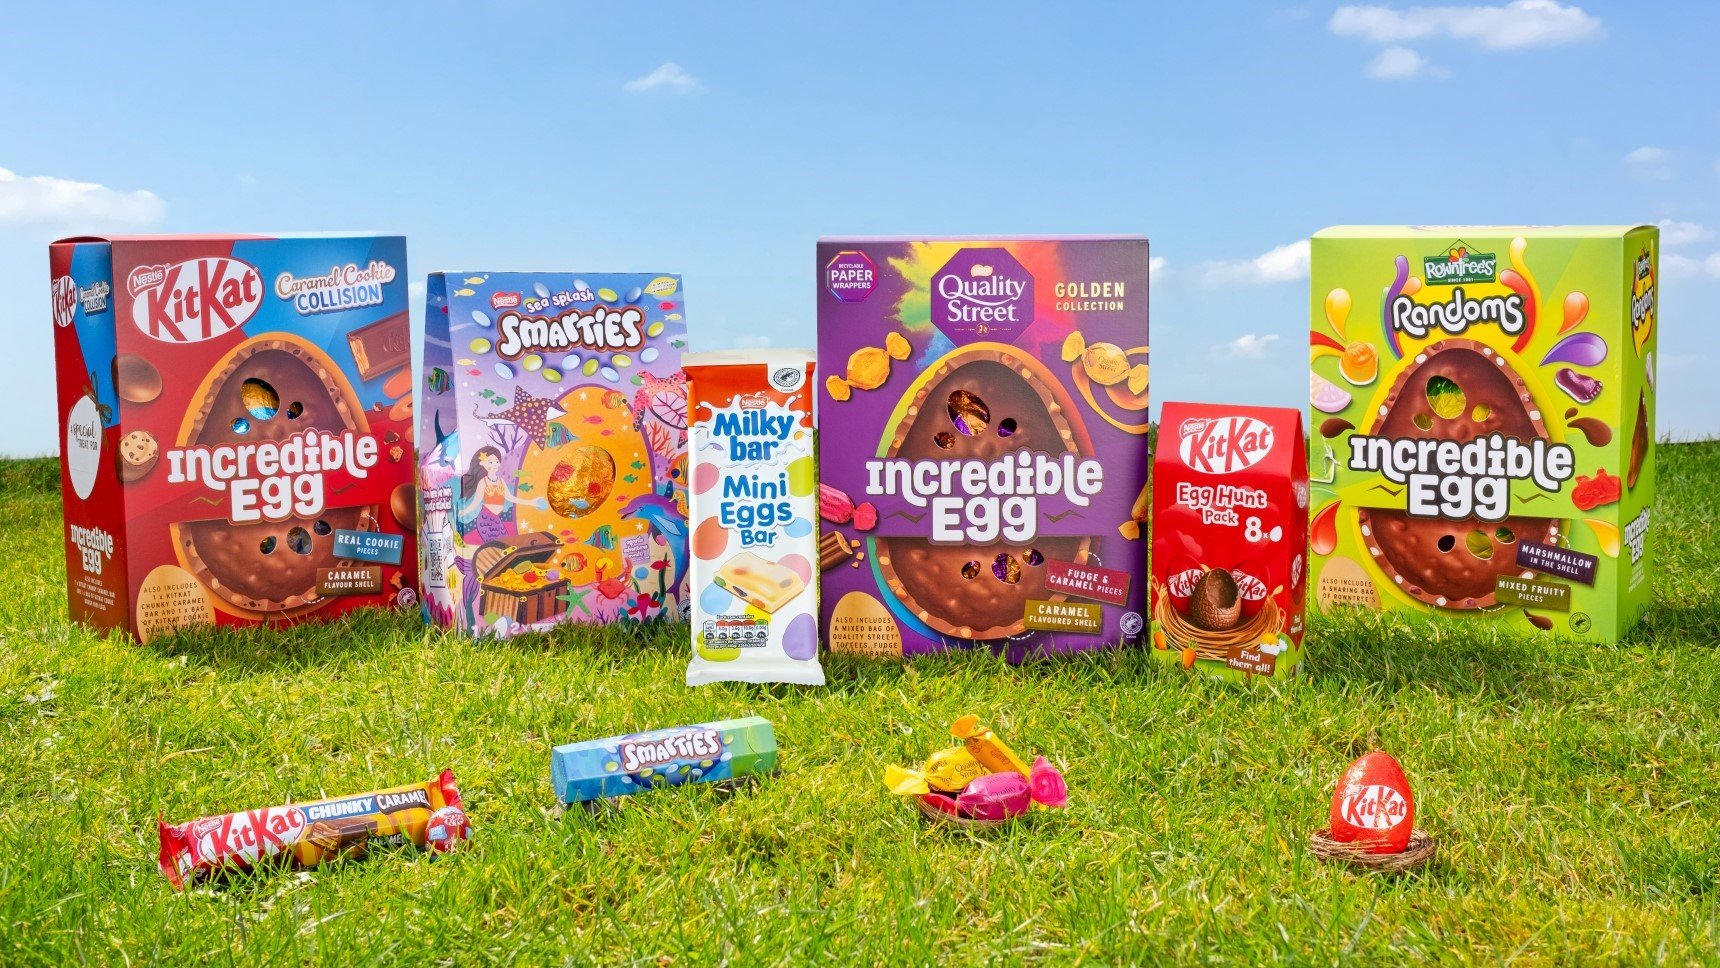 Nestlé's new Easter range sits on grass with blue sky in background